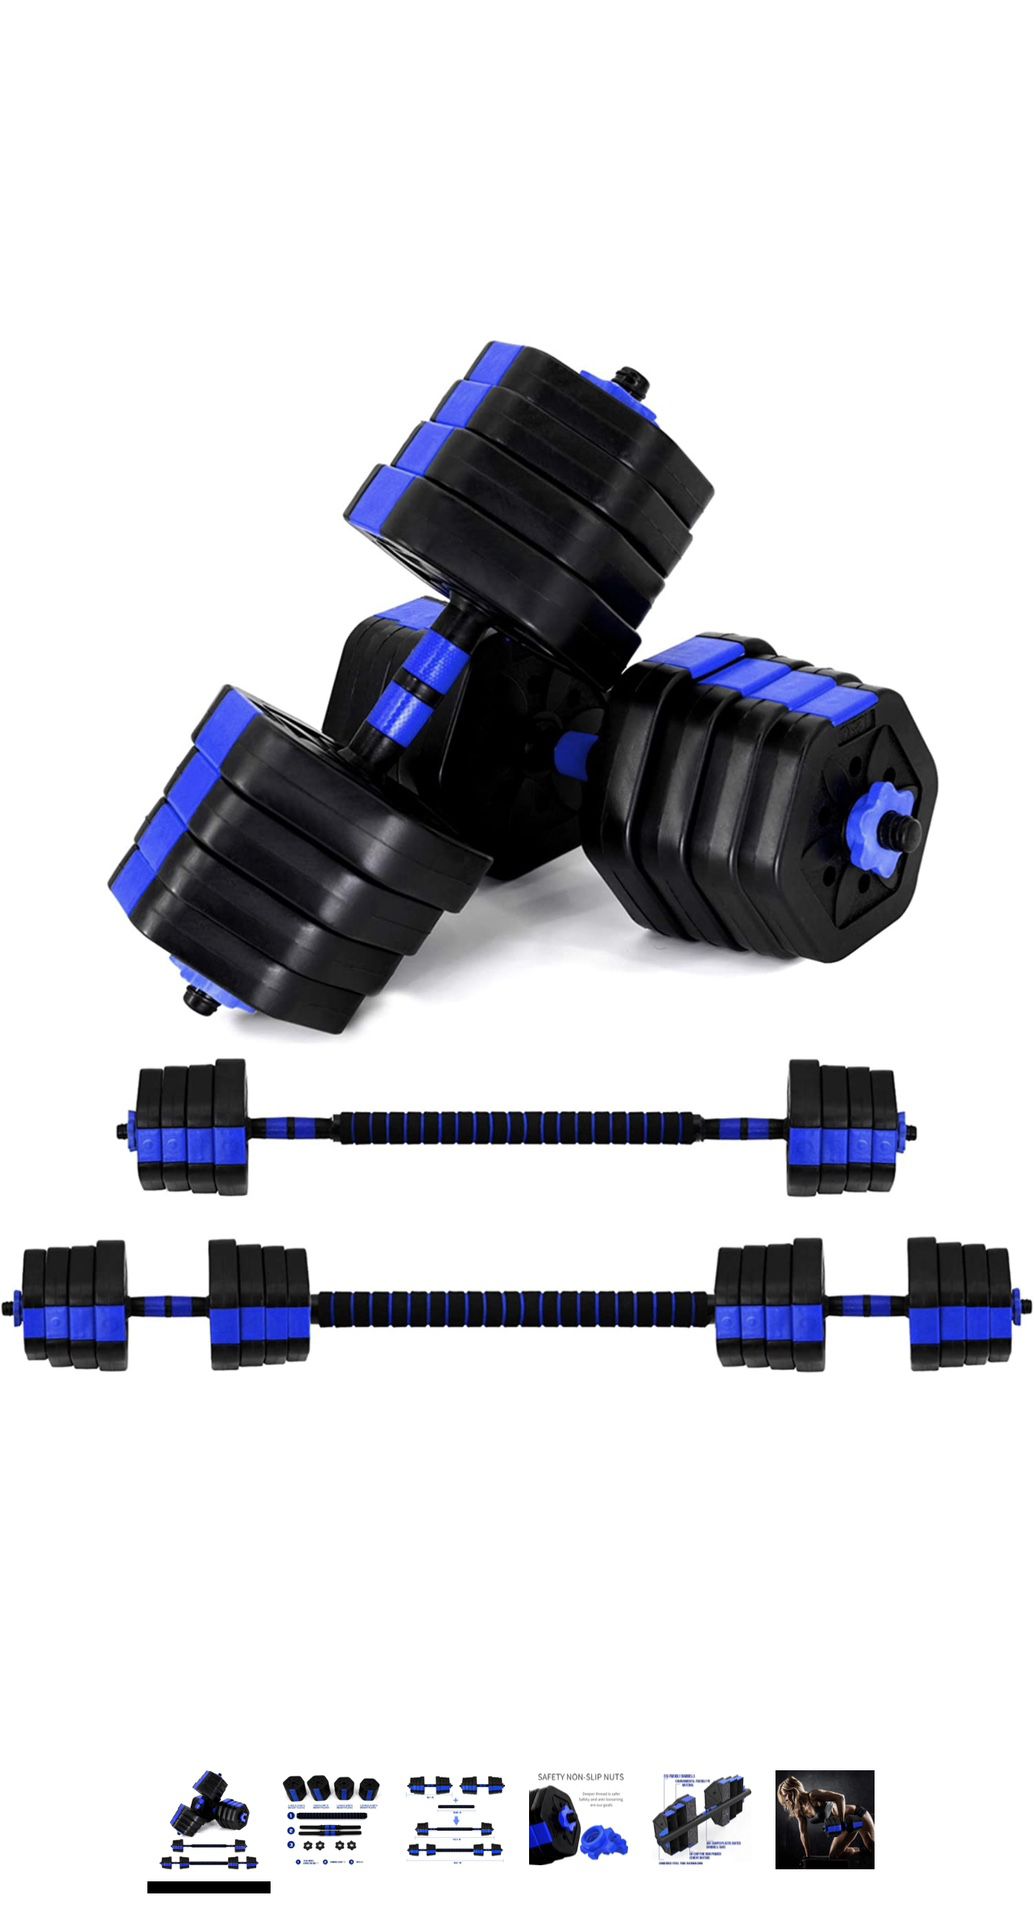 VIVITORY Dumbbell Sets Adjustable Weights, Free Weights Dumbbells Set with Connector, Non-Rolling Adjustable Dumbbell Set, Weights Set for Home Gym, 4